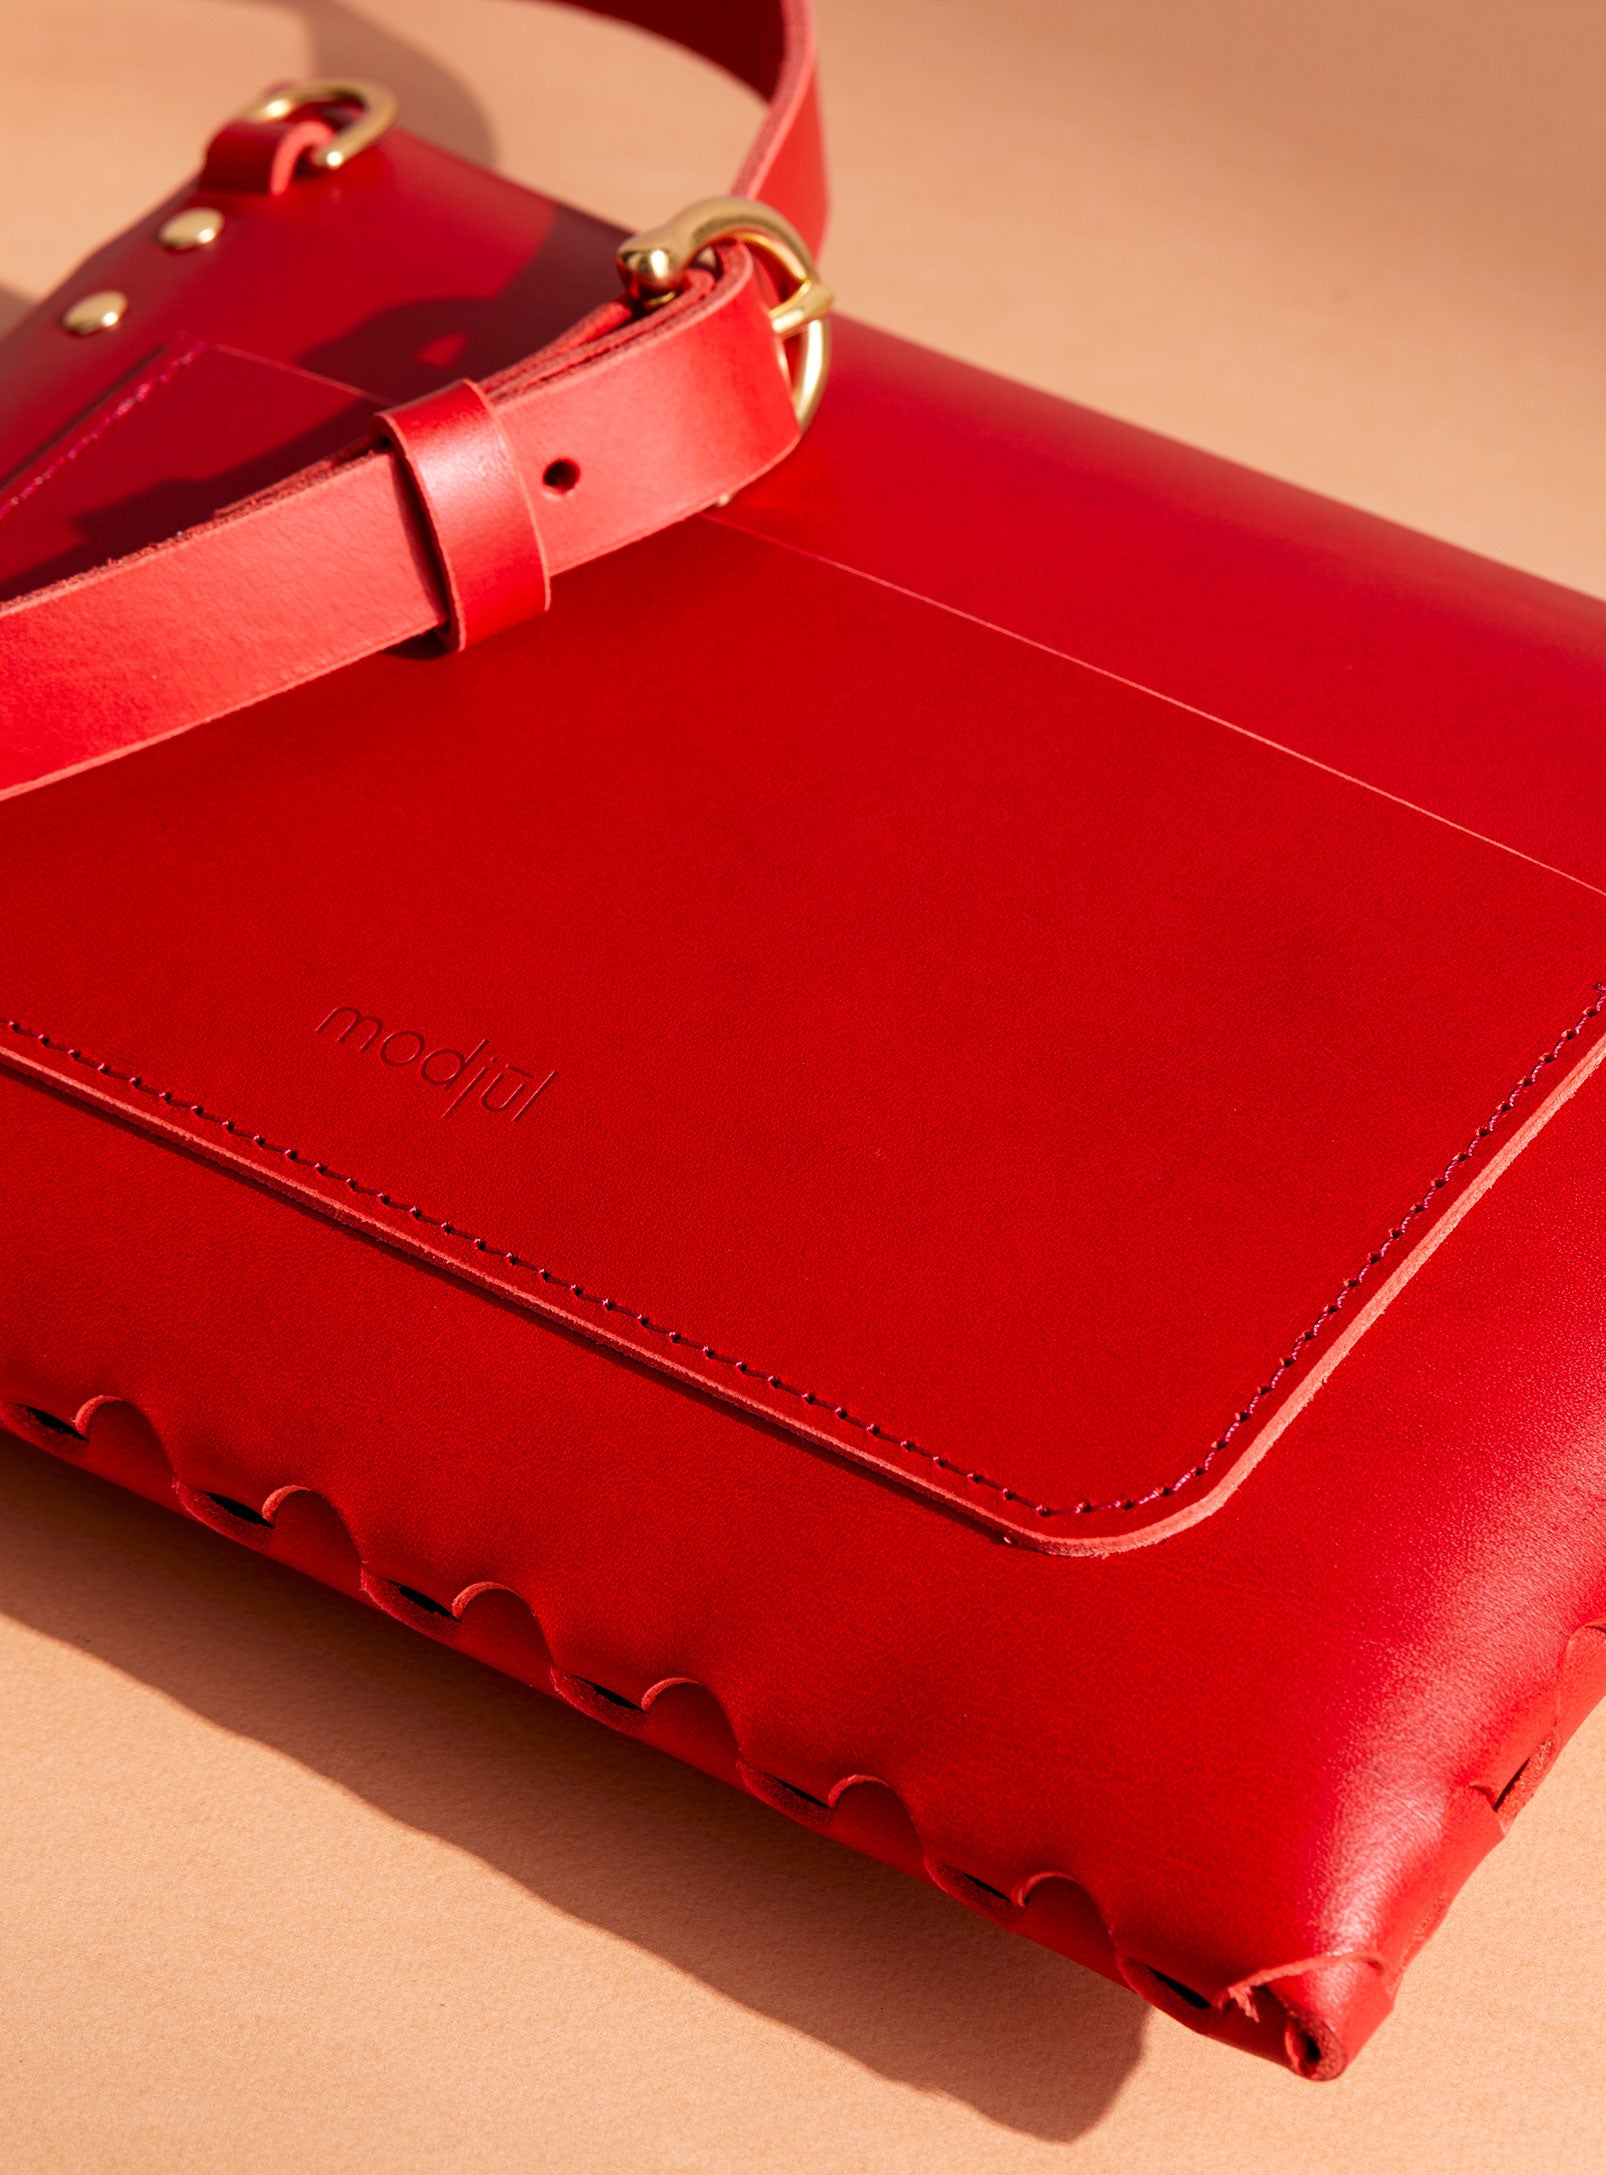 A close up of the back pocket detail on the mini bag deluxe handcrafted in Canada using red Italian leather and quality brass hardware.